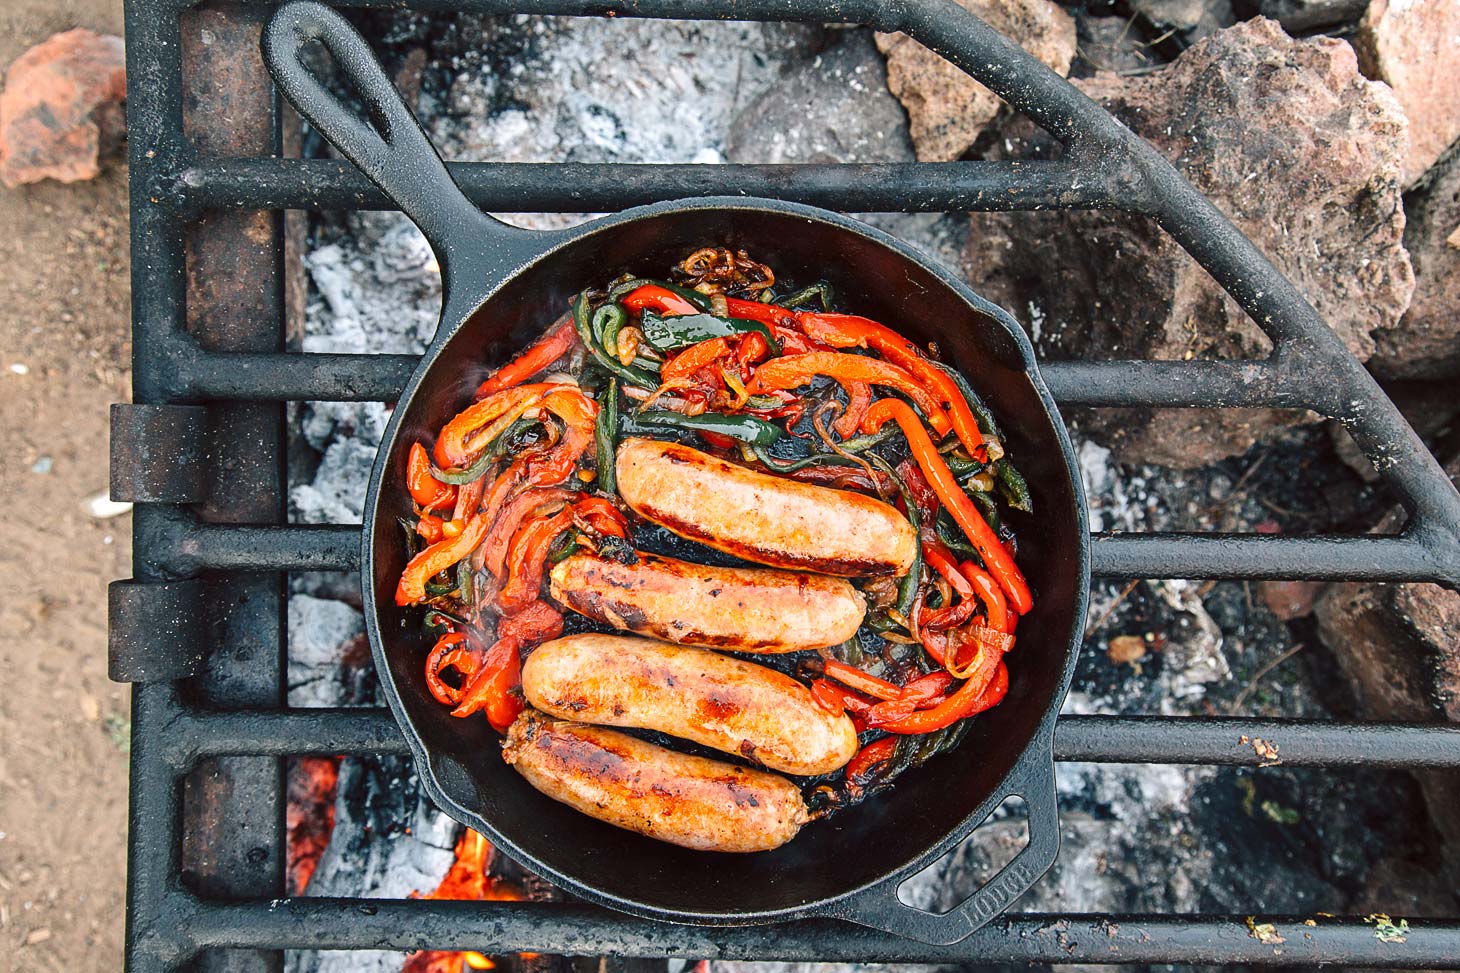 Brats with onions and peppers